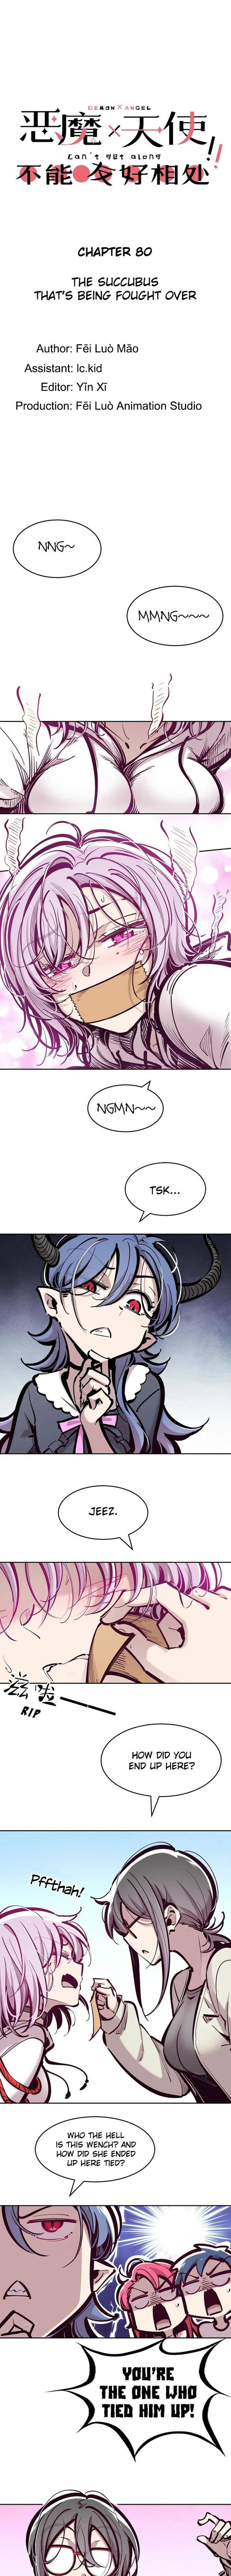 Demon X Angel Cant Get Along Chapter 80 Page 1